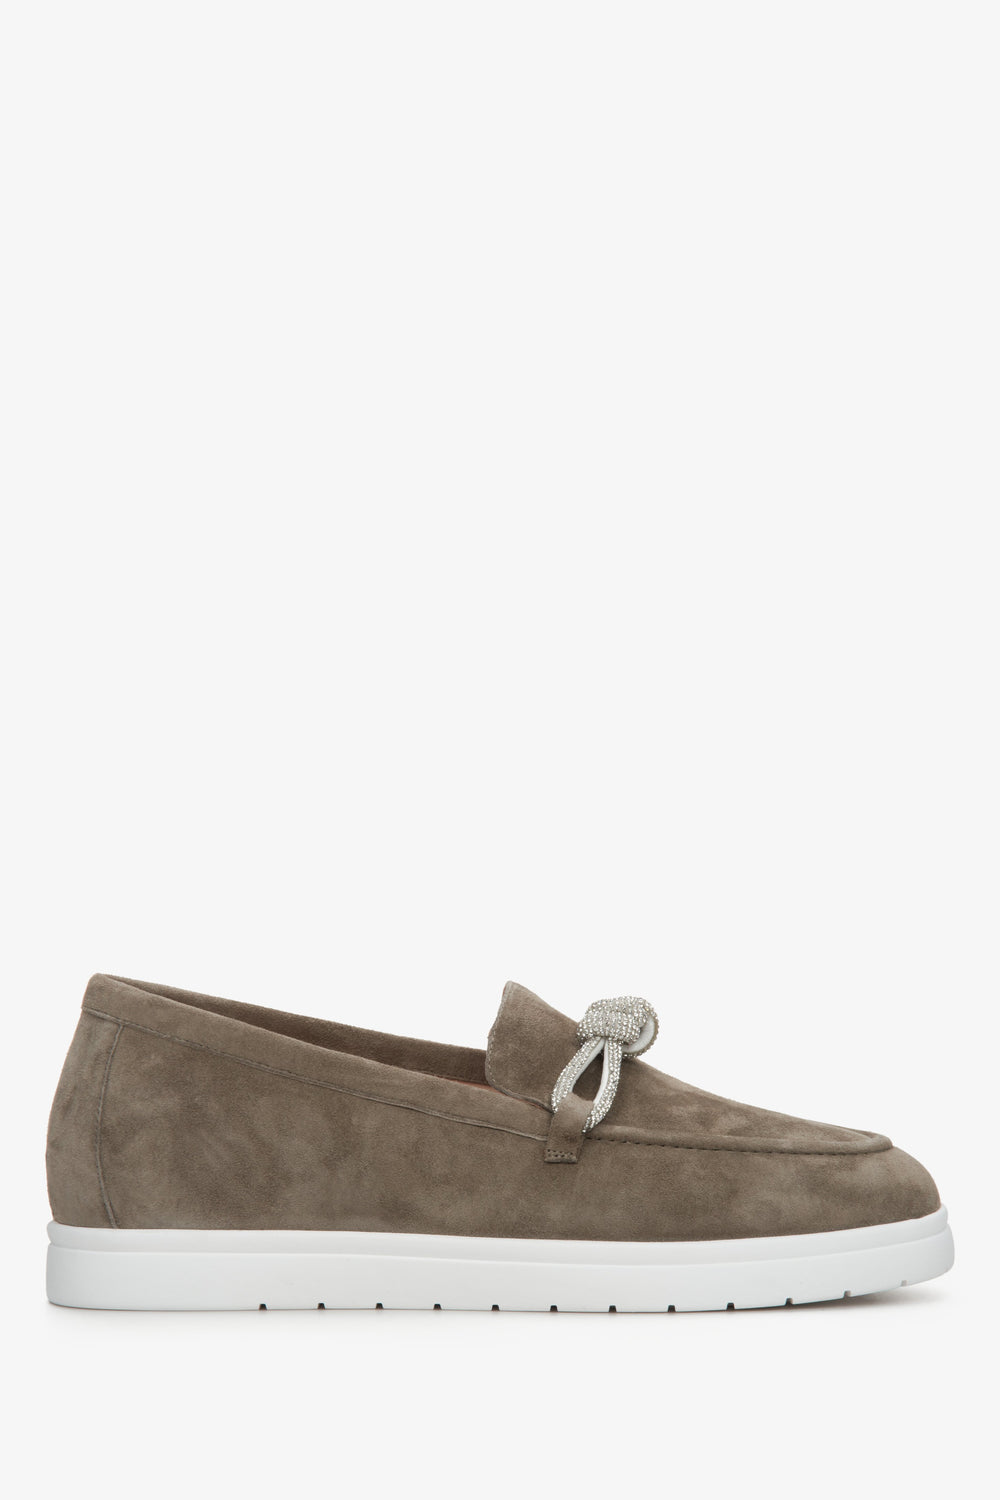 Women's Grey & Brown Velour Moccasins with a Decorative Bow Estro ER00112716.